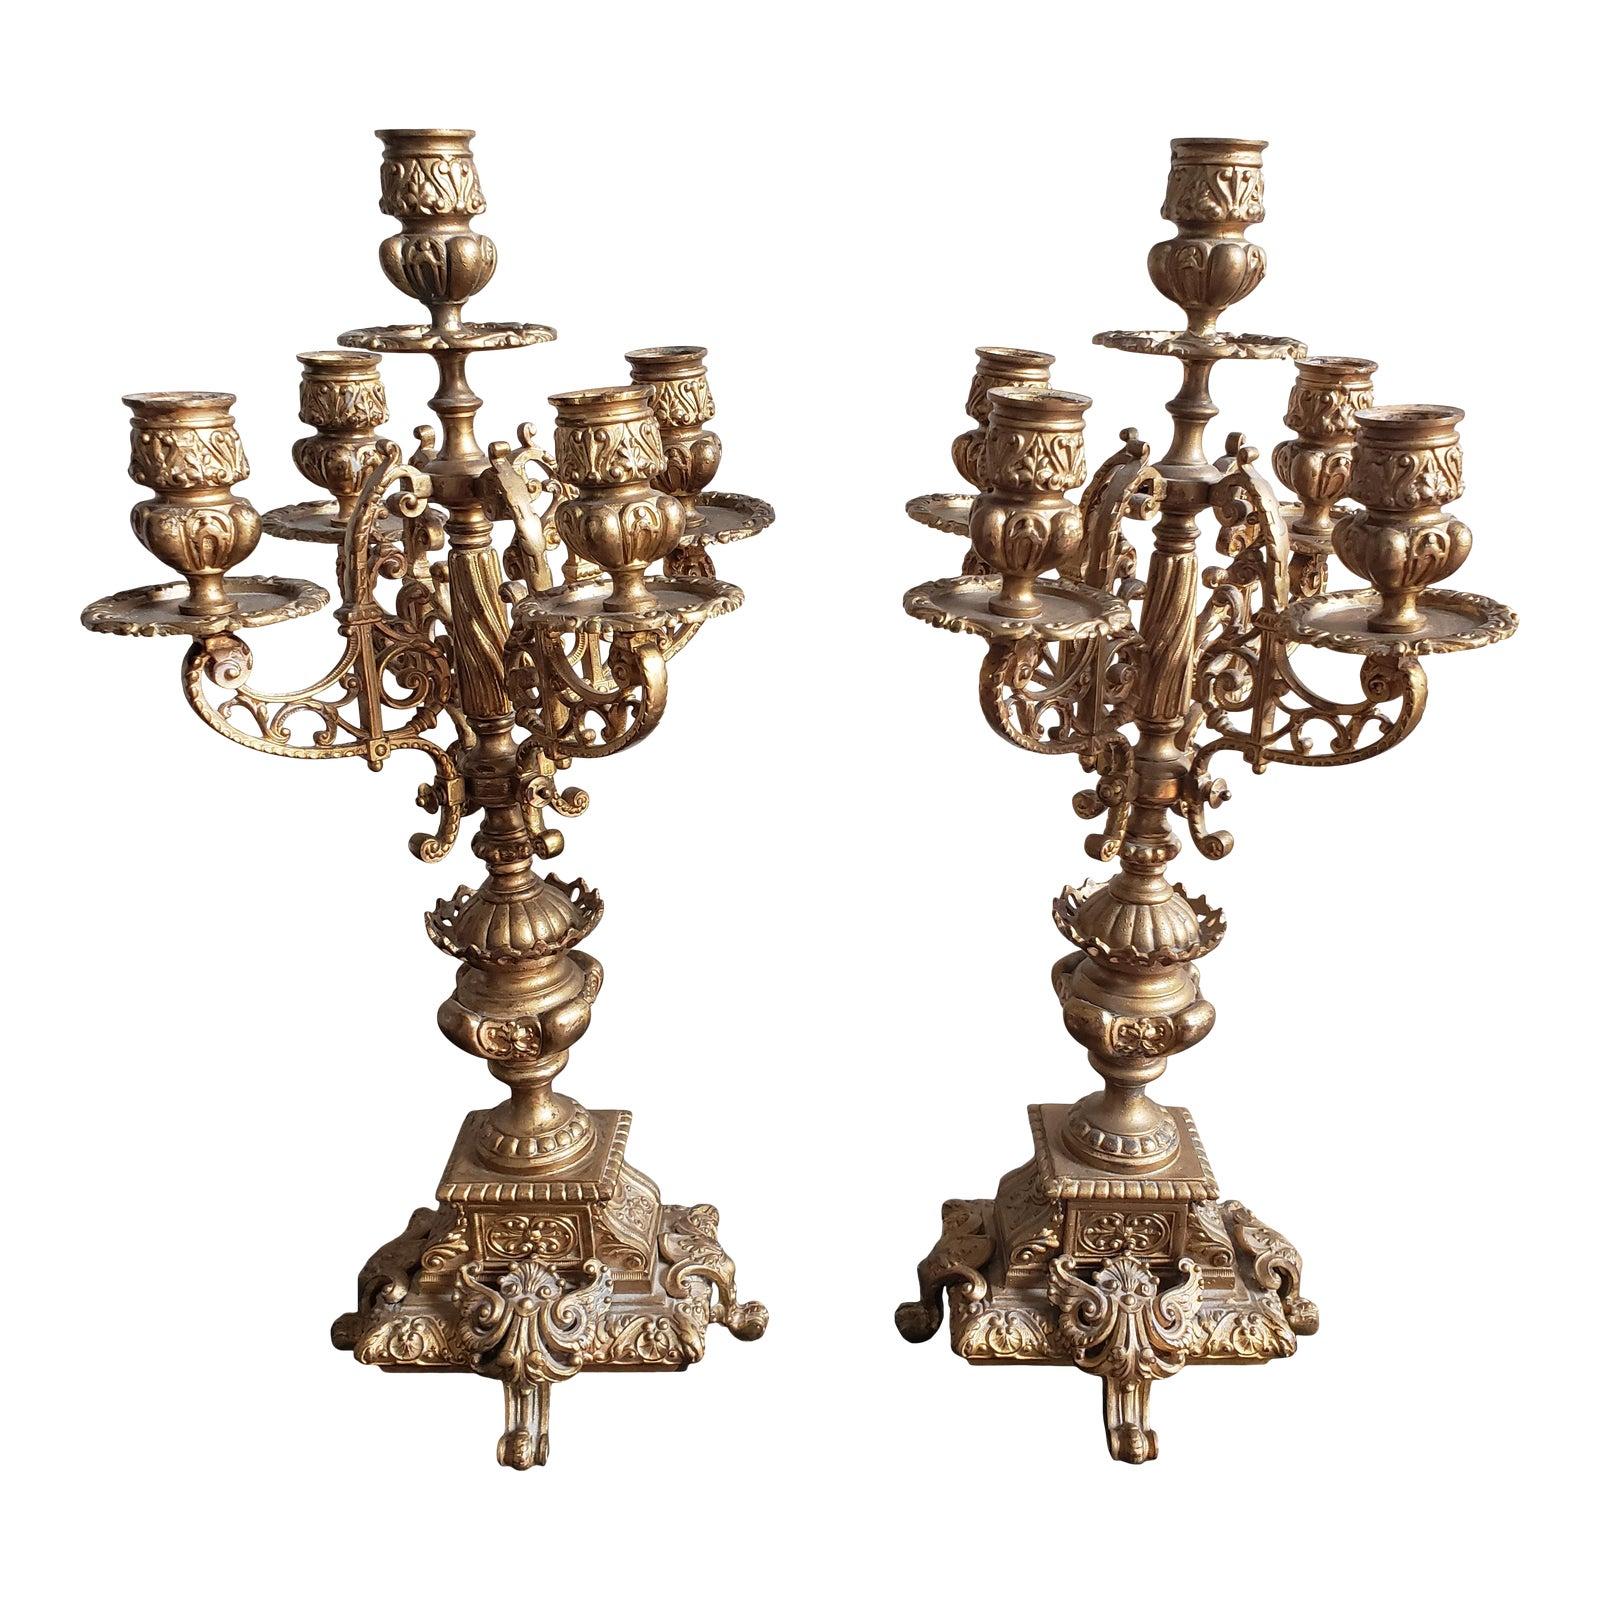 1930s Italian Rococo 5 Arm Gilted Bronze Candelabras, a Pair For Sale